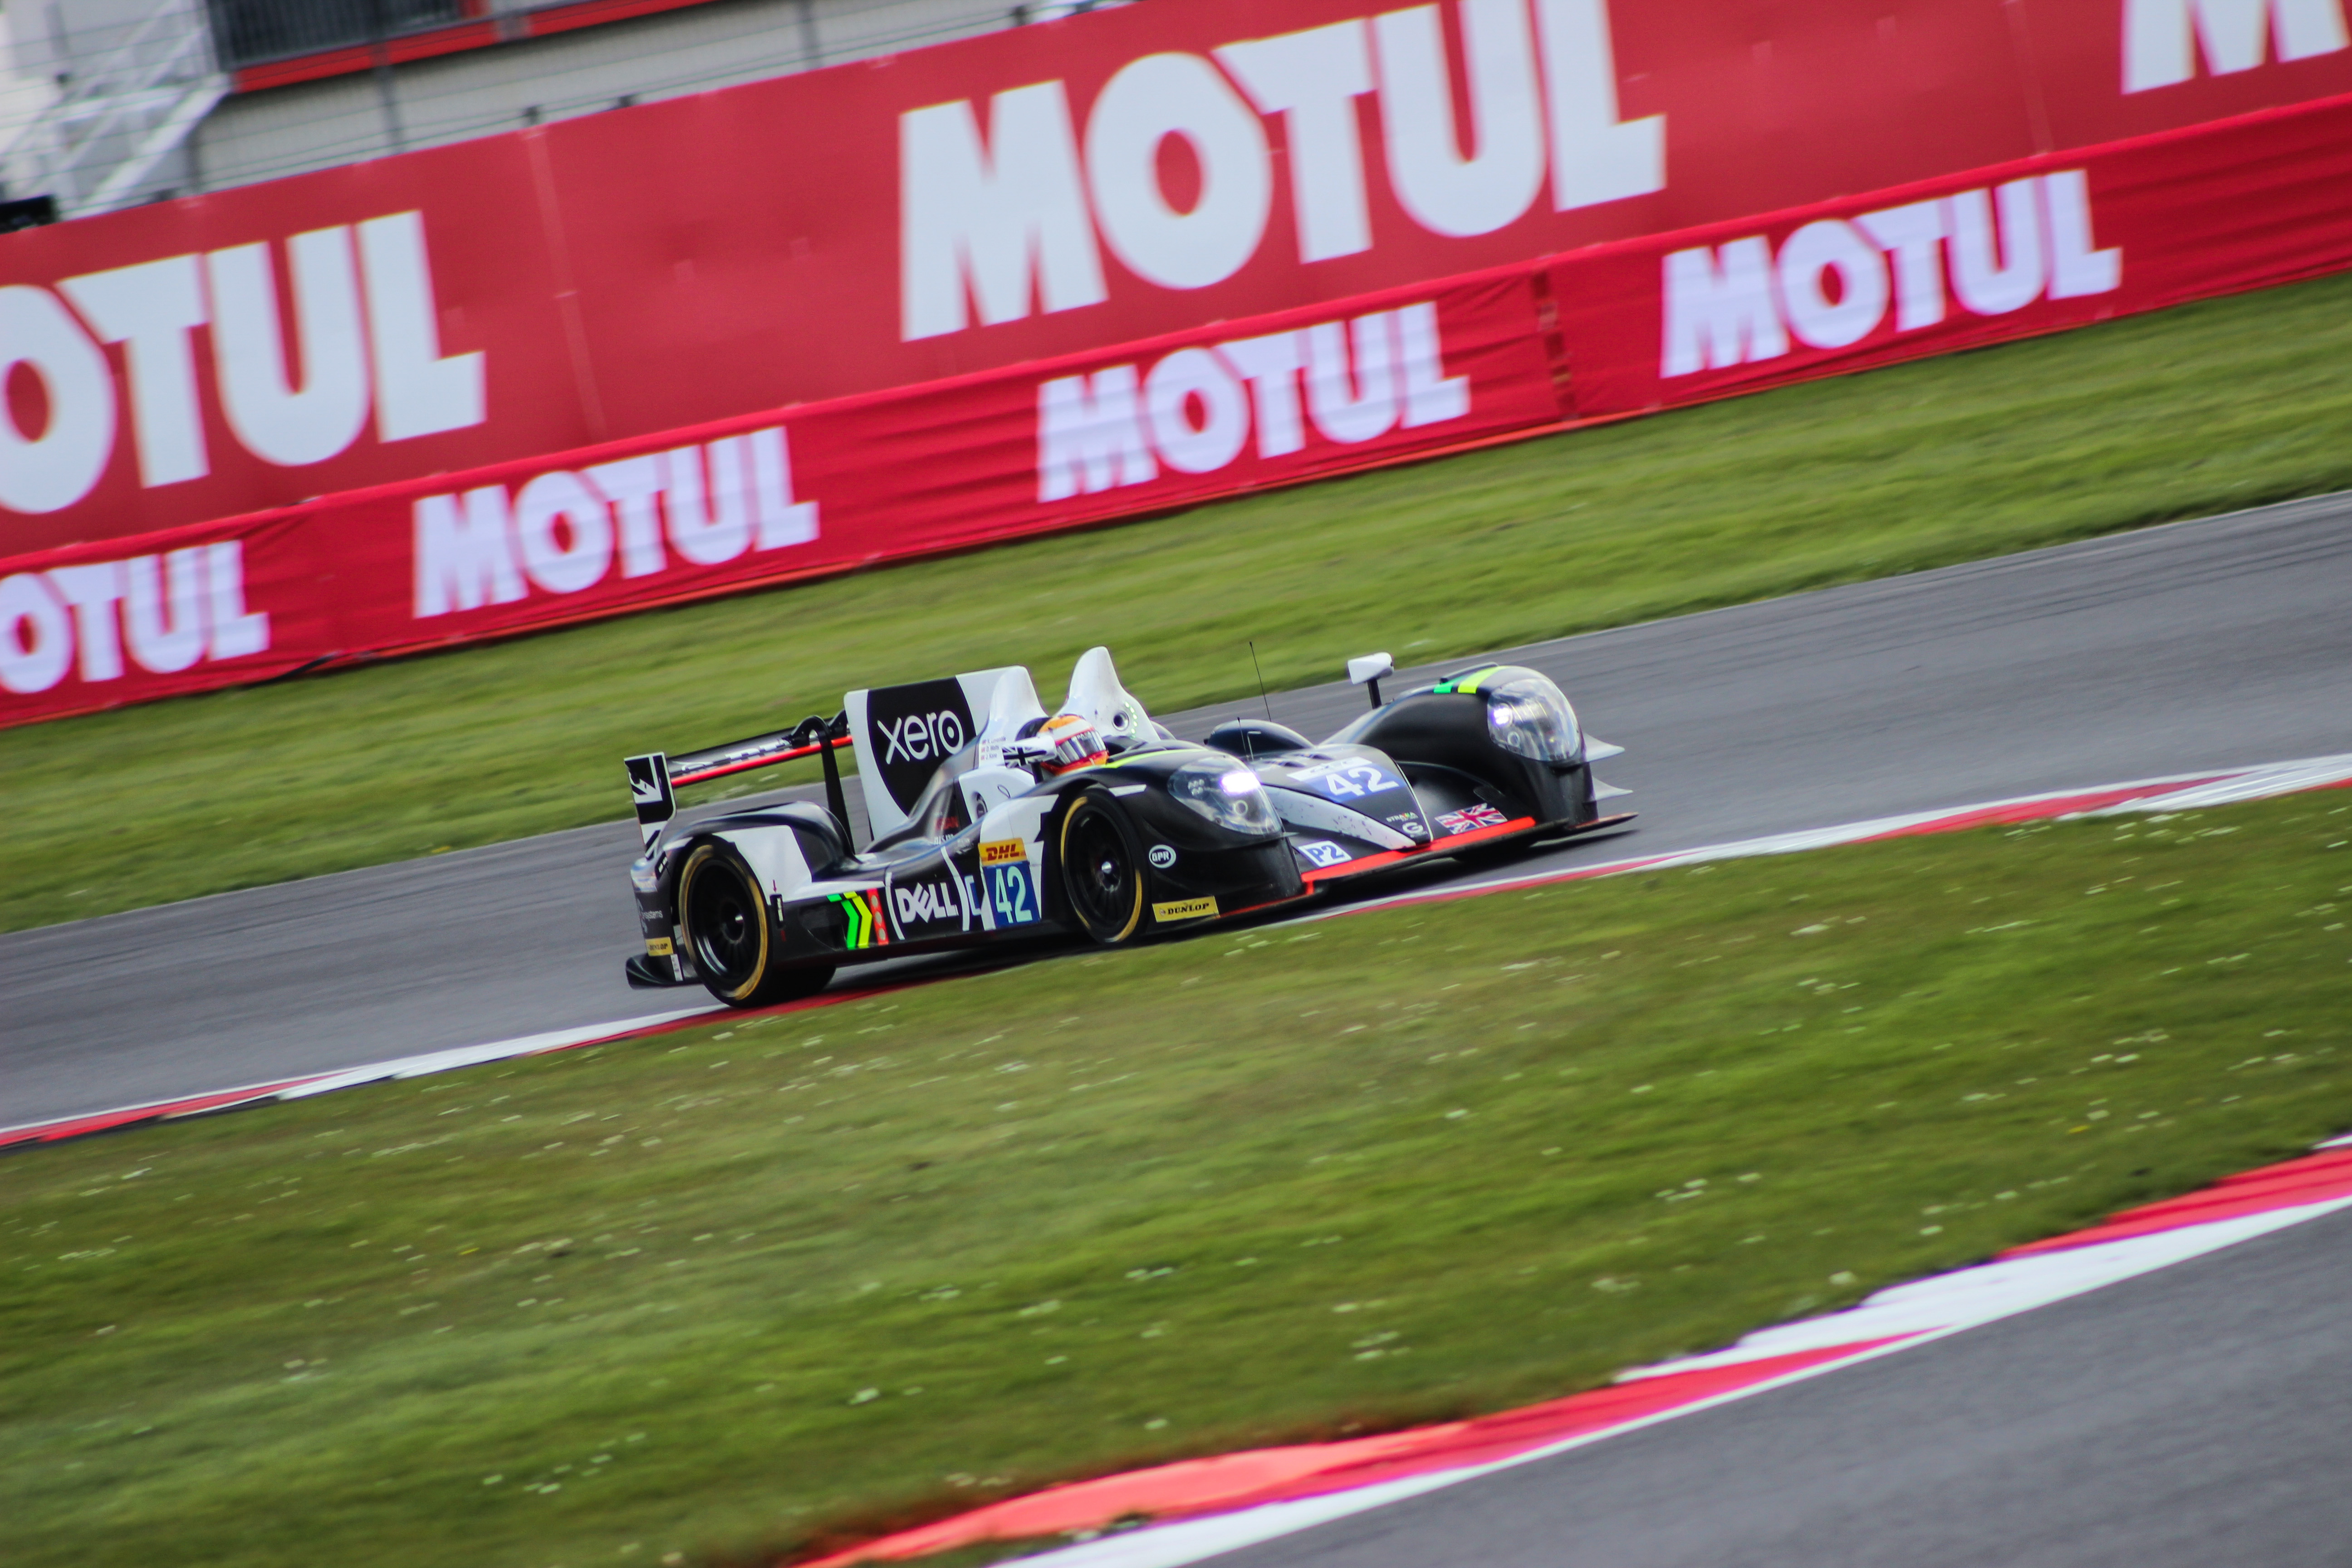 Lewis Williamson to continue driving for Strakka in remainder of 2016